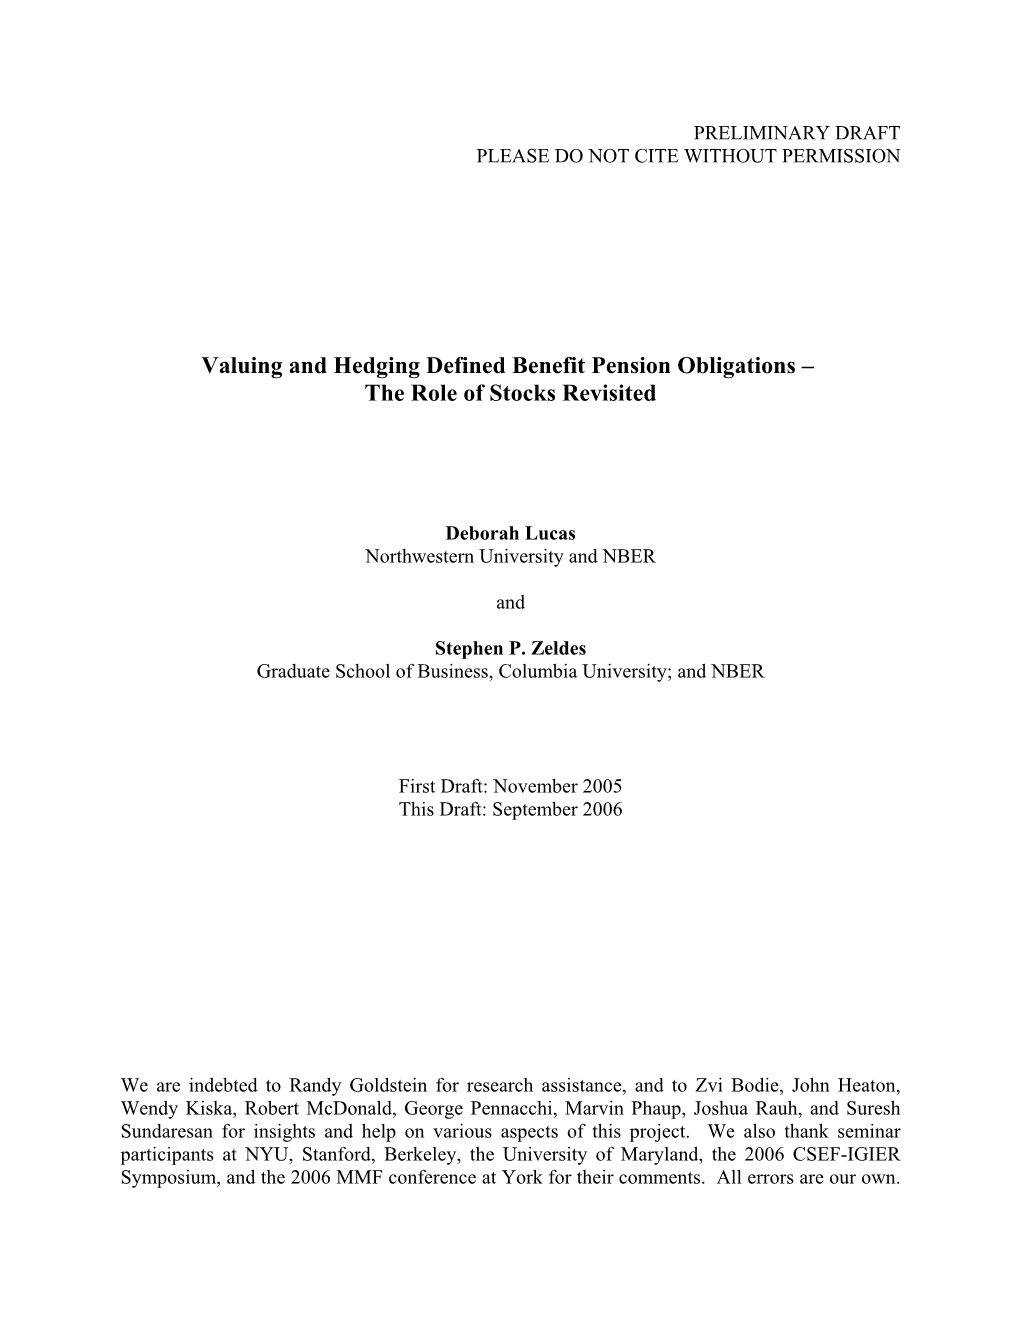 Valuing and Hedging Defined Benefit Pension Plans: the Role of Stocks